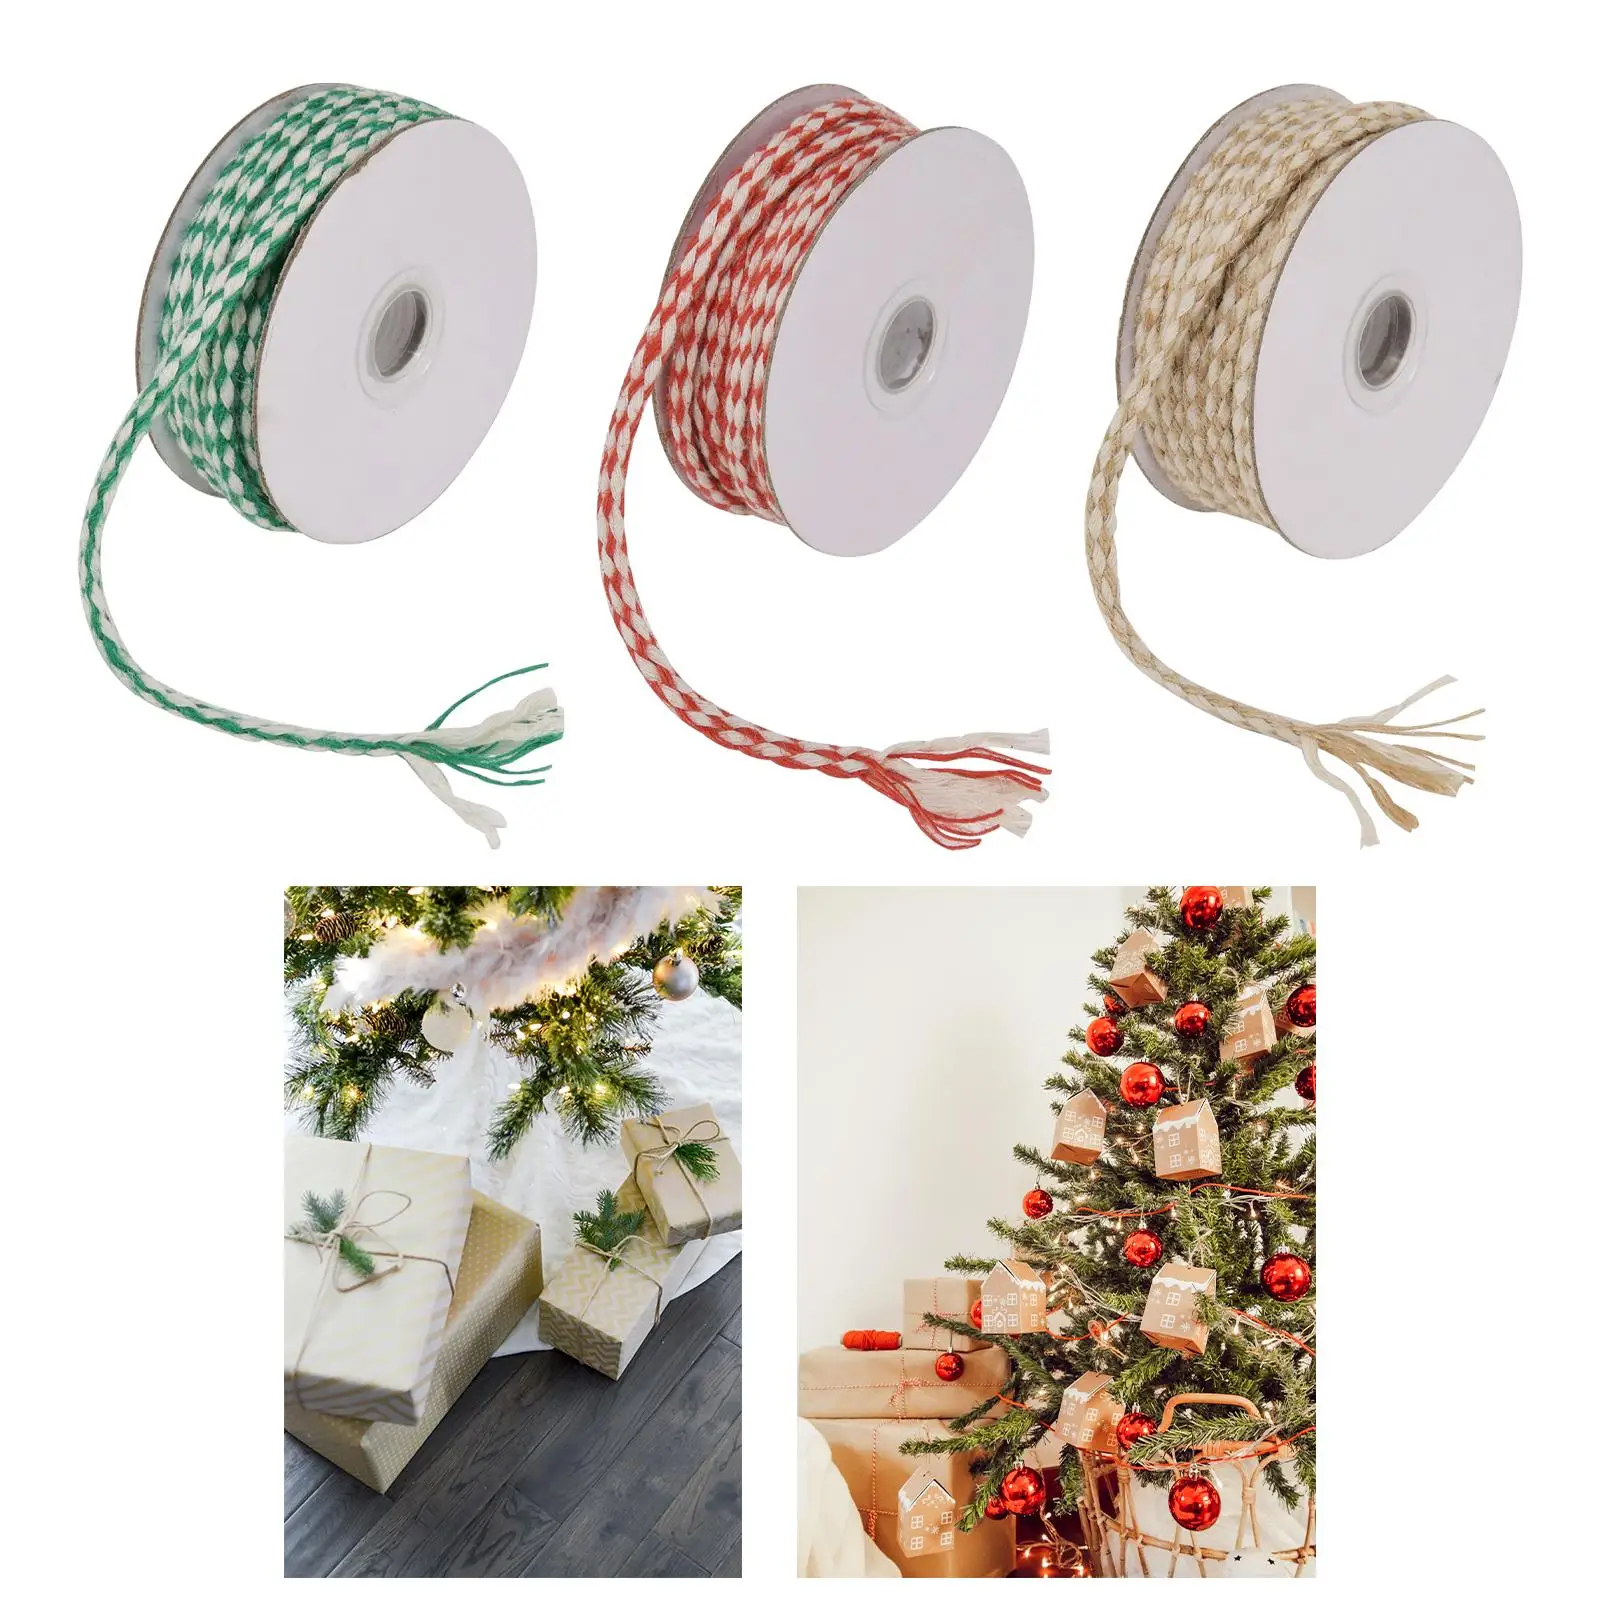 Christmas Cotton Twine Roll Xmas DIY Crafts 10M Present Wrapping Cord Decor